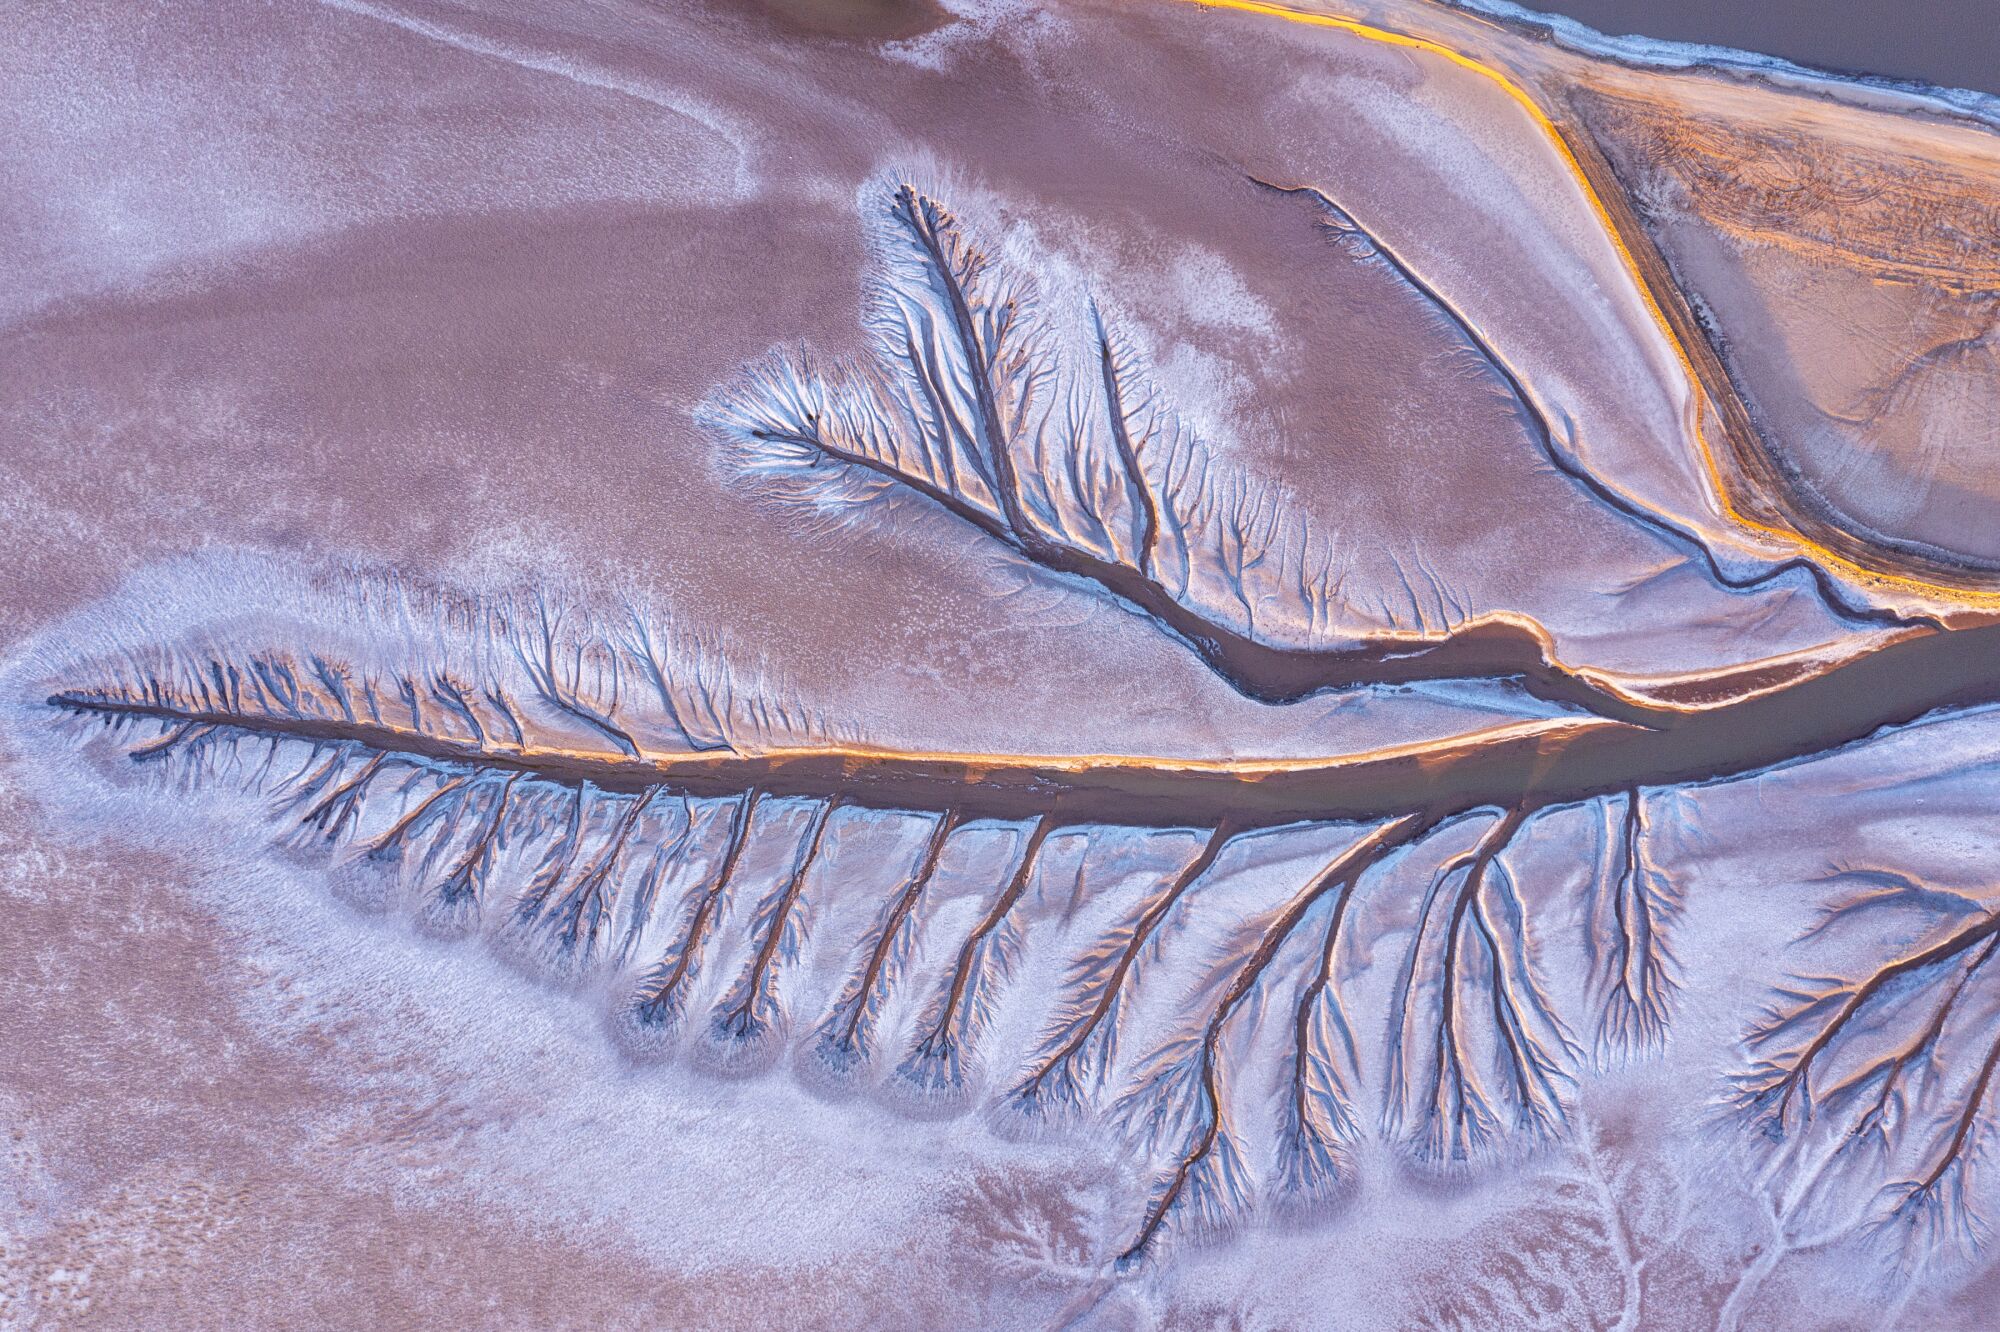 Tentacles formed by the ebb and flow of tides etch a pattern into mud in the Colorado River Delta in Mexico